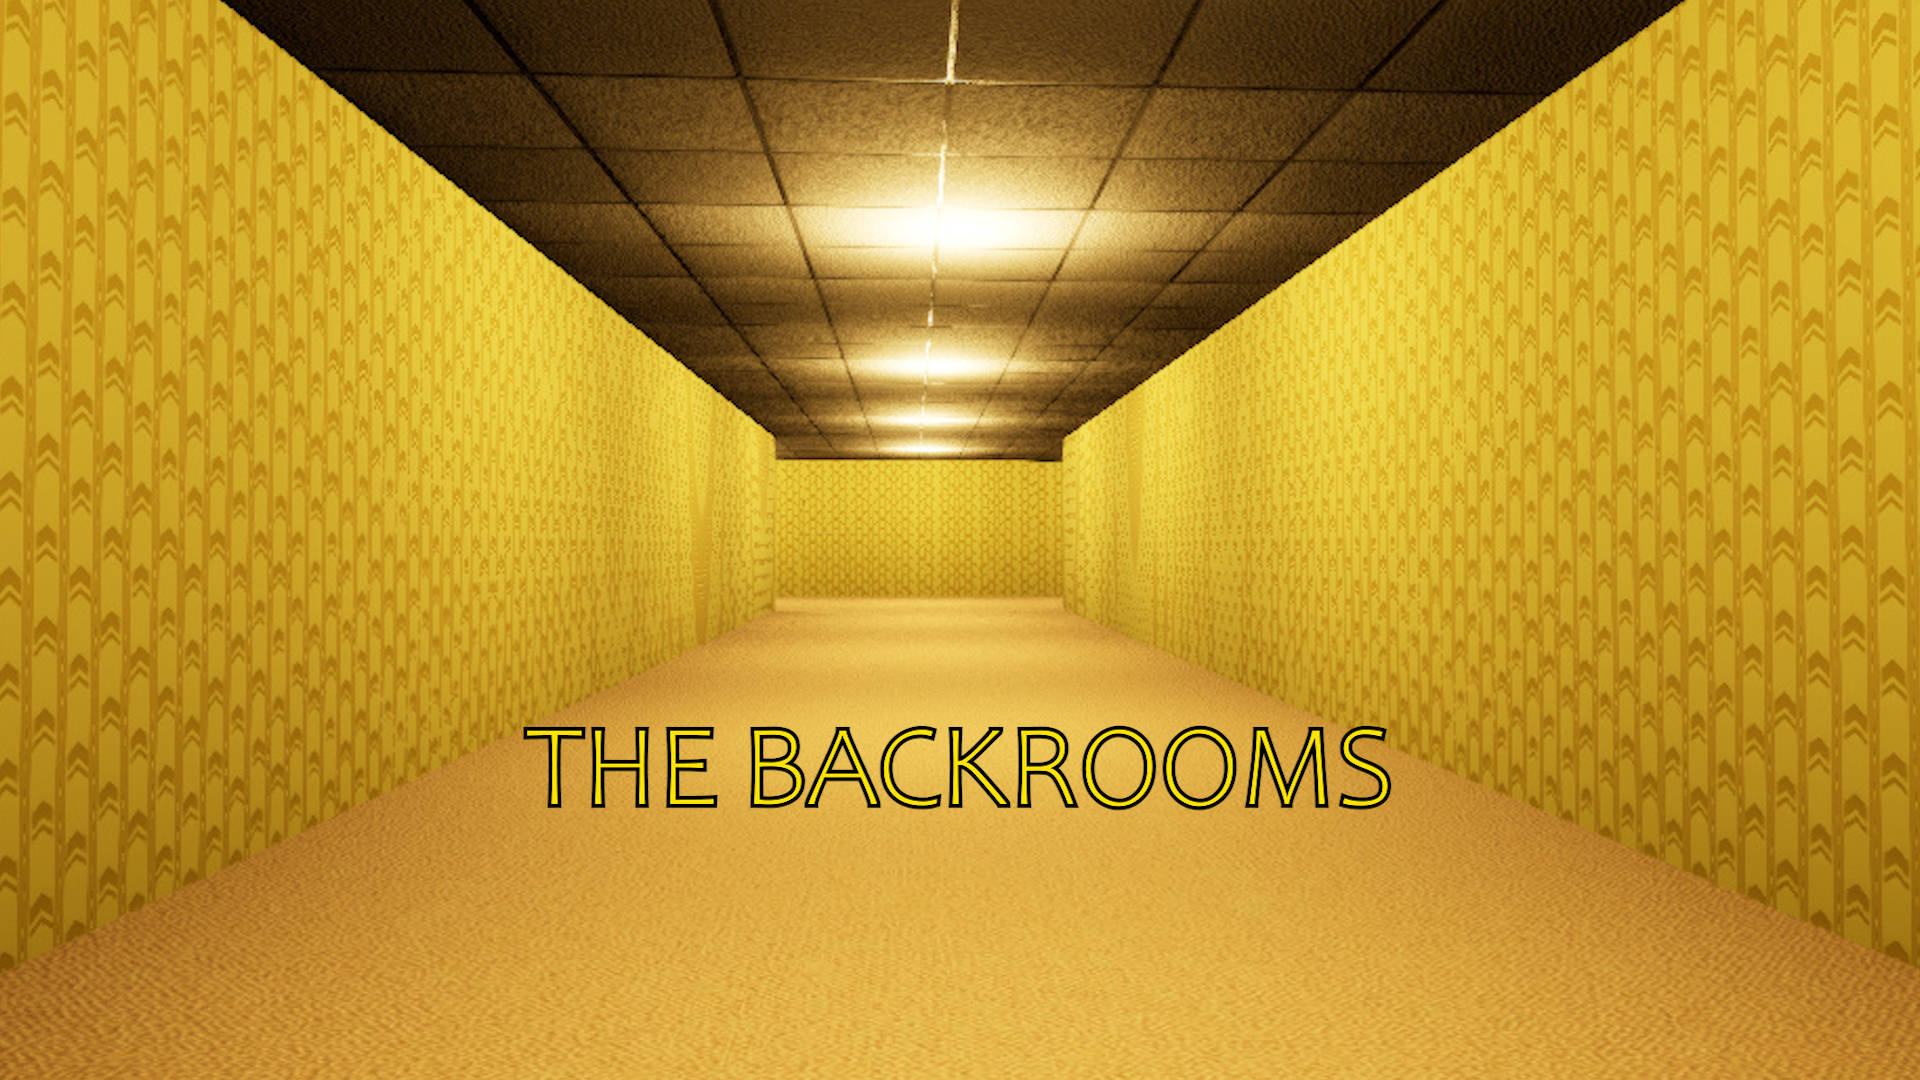 100+] The Backrooms Wallpapers